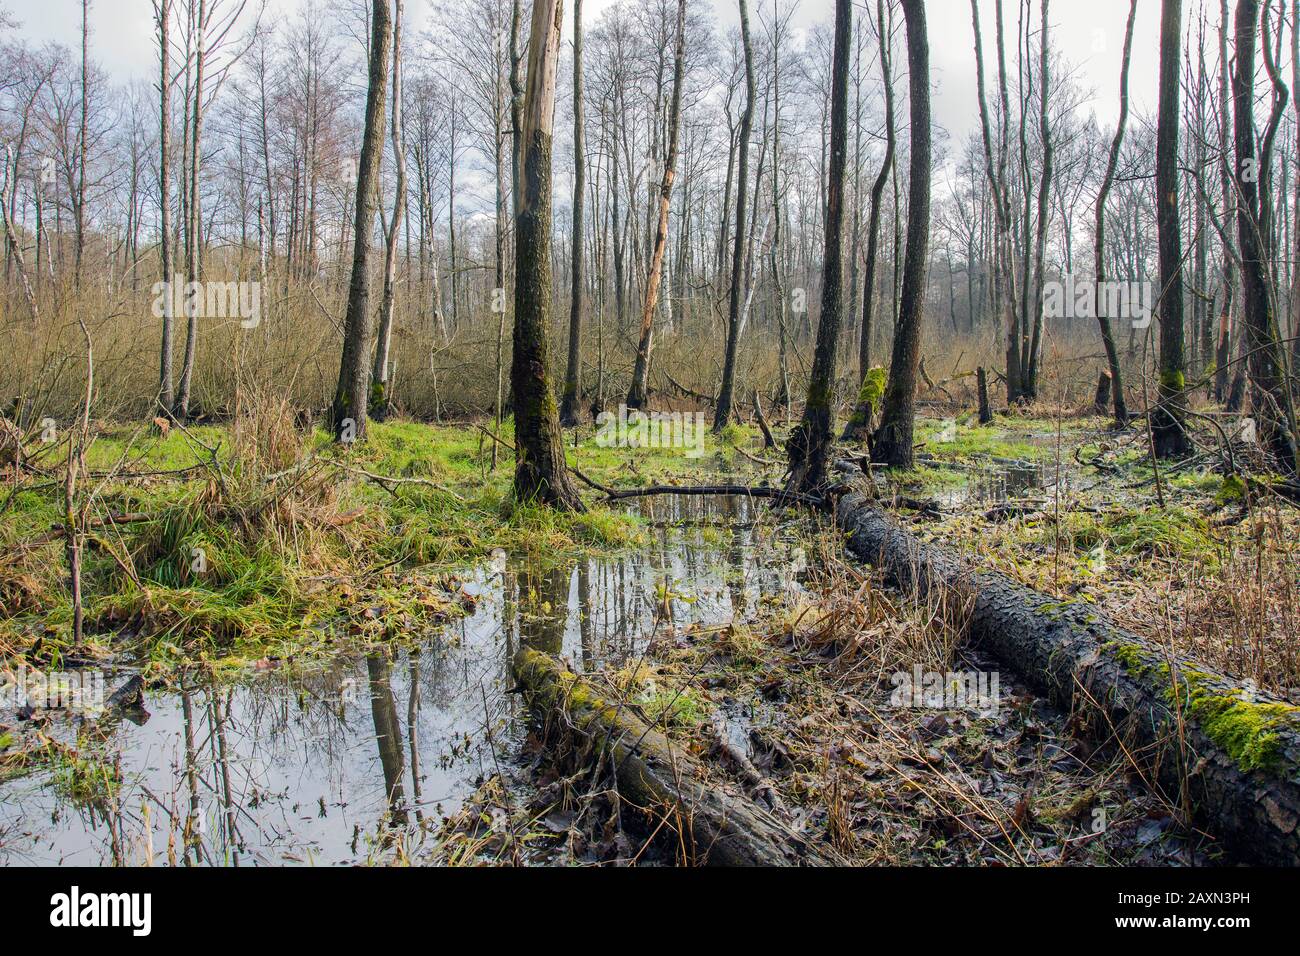 Swampy areas and broken trees in the forest, cold day Stock Photo